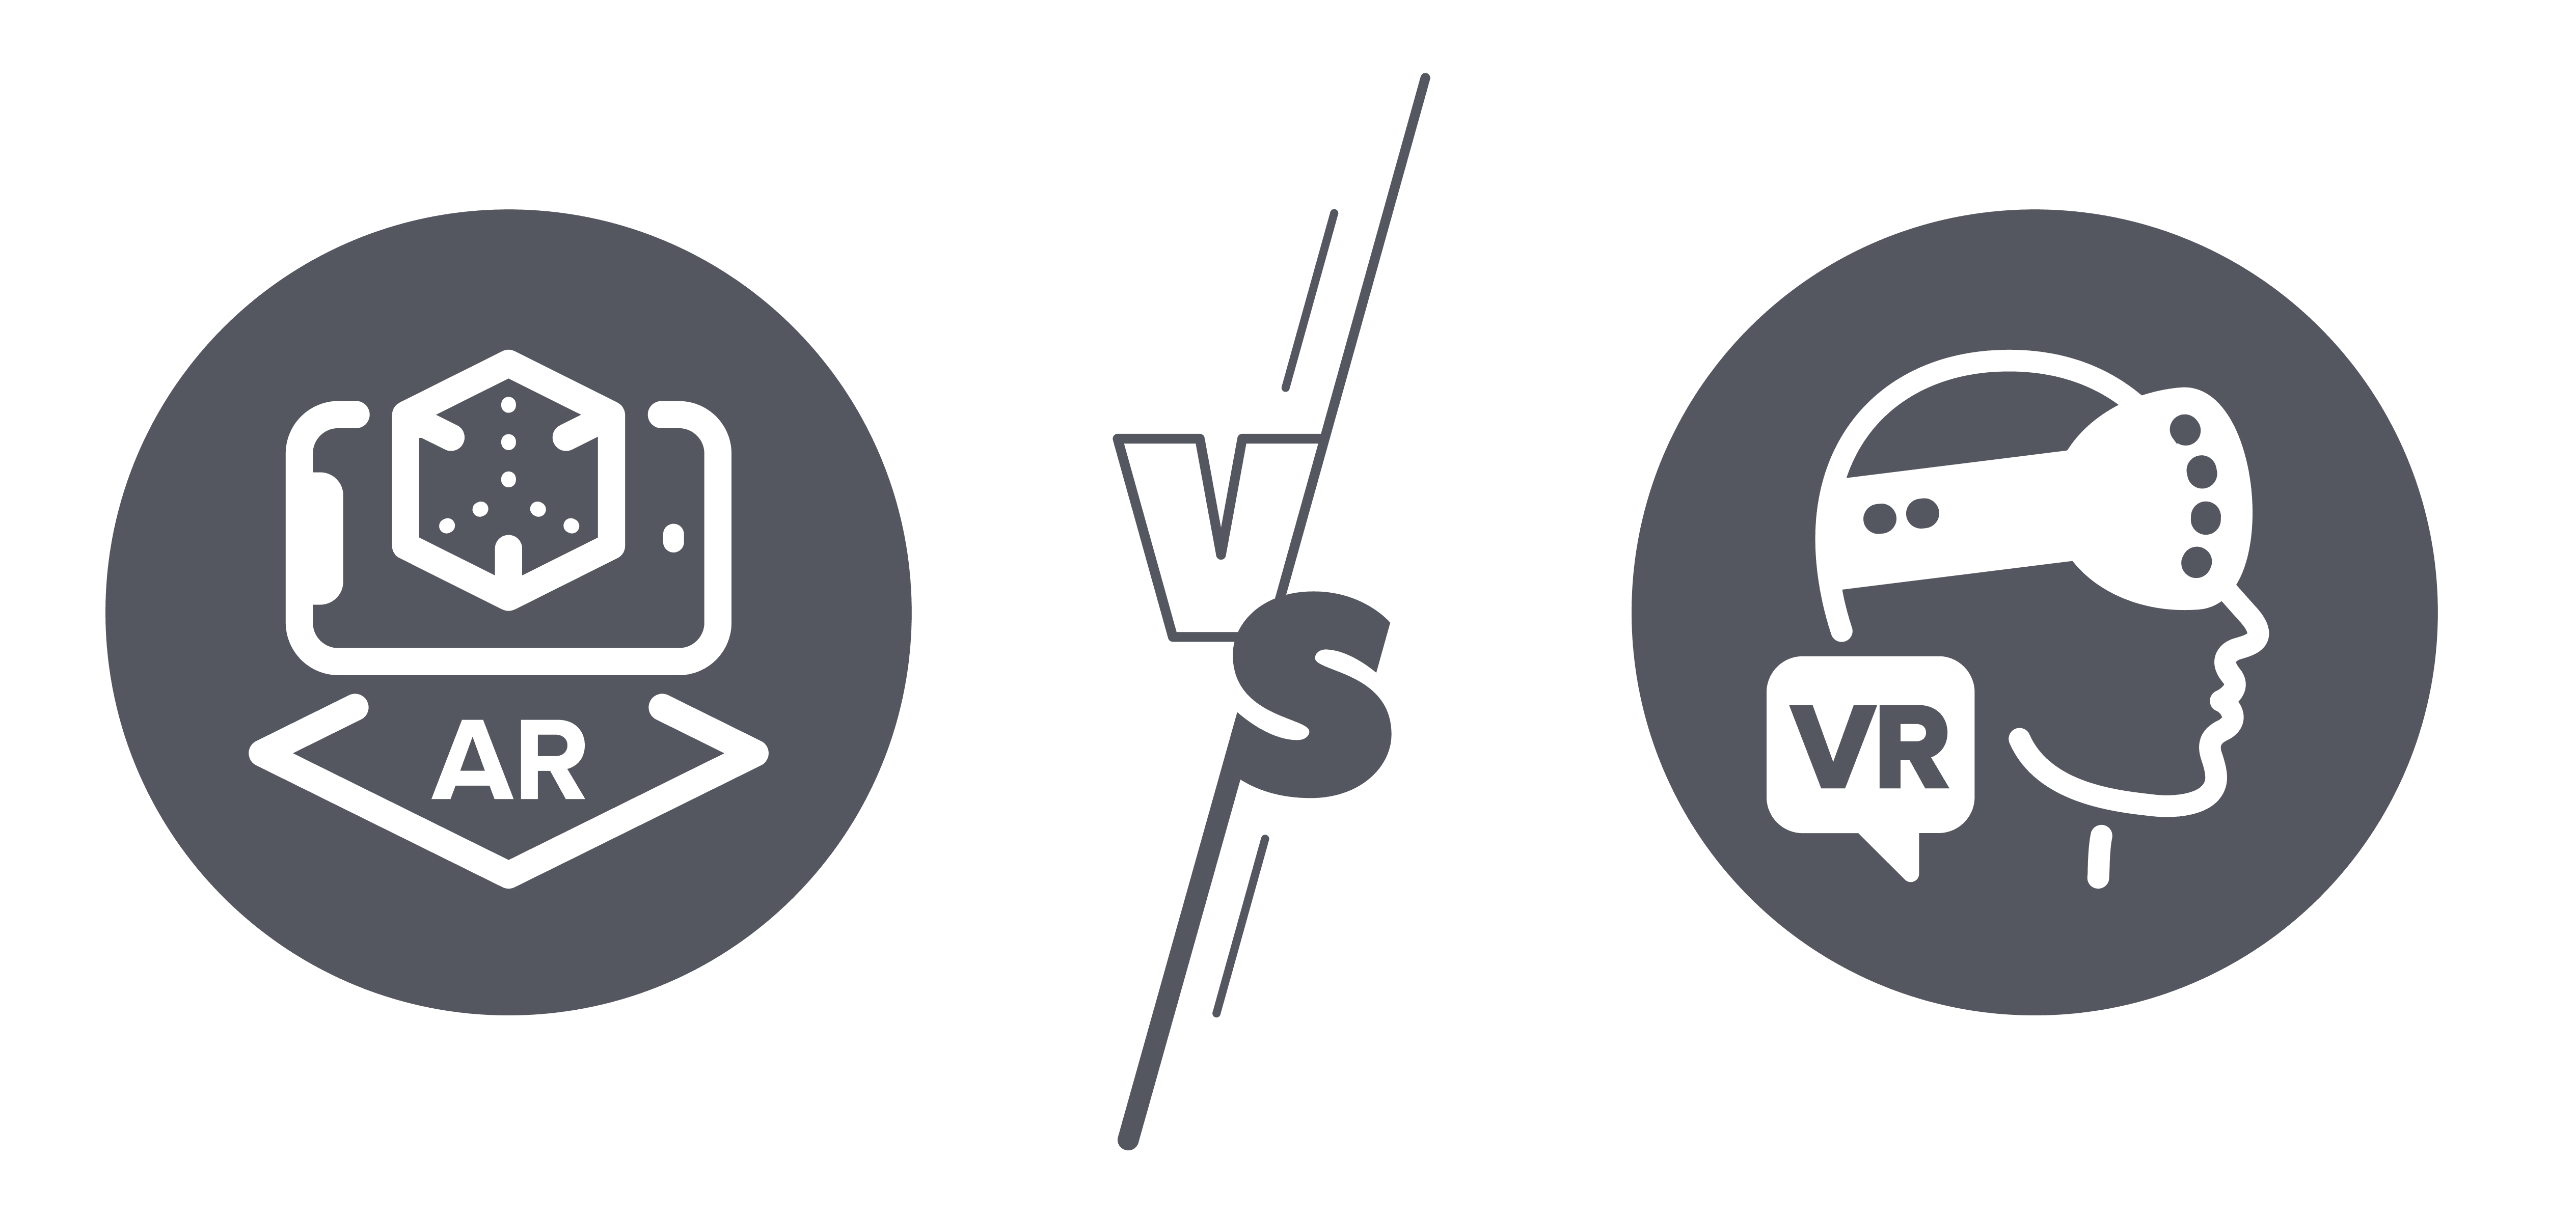 A grpahic that has an icon to represent AR on the left and VR on the right with "VS" written between them.